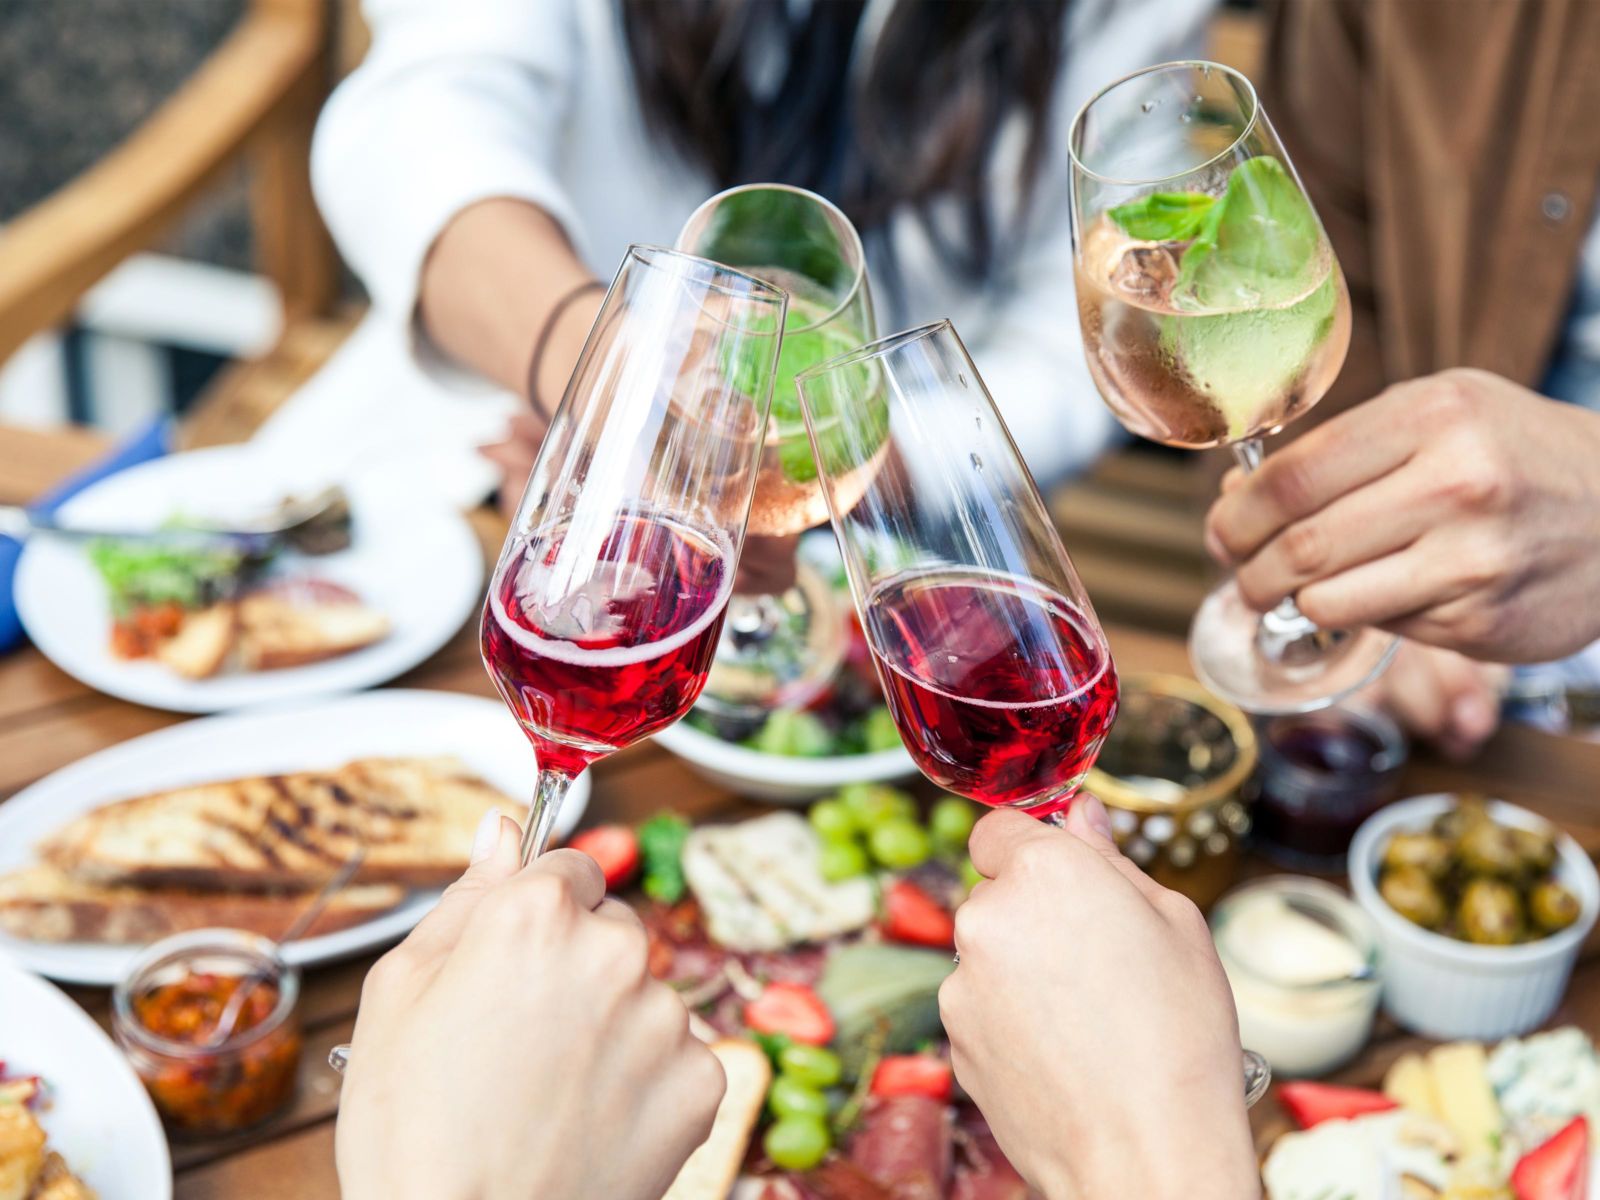 5 Course Dinner & Drinks Hen Party in Barcelona